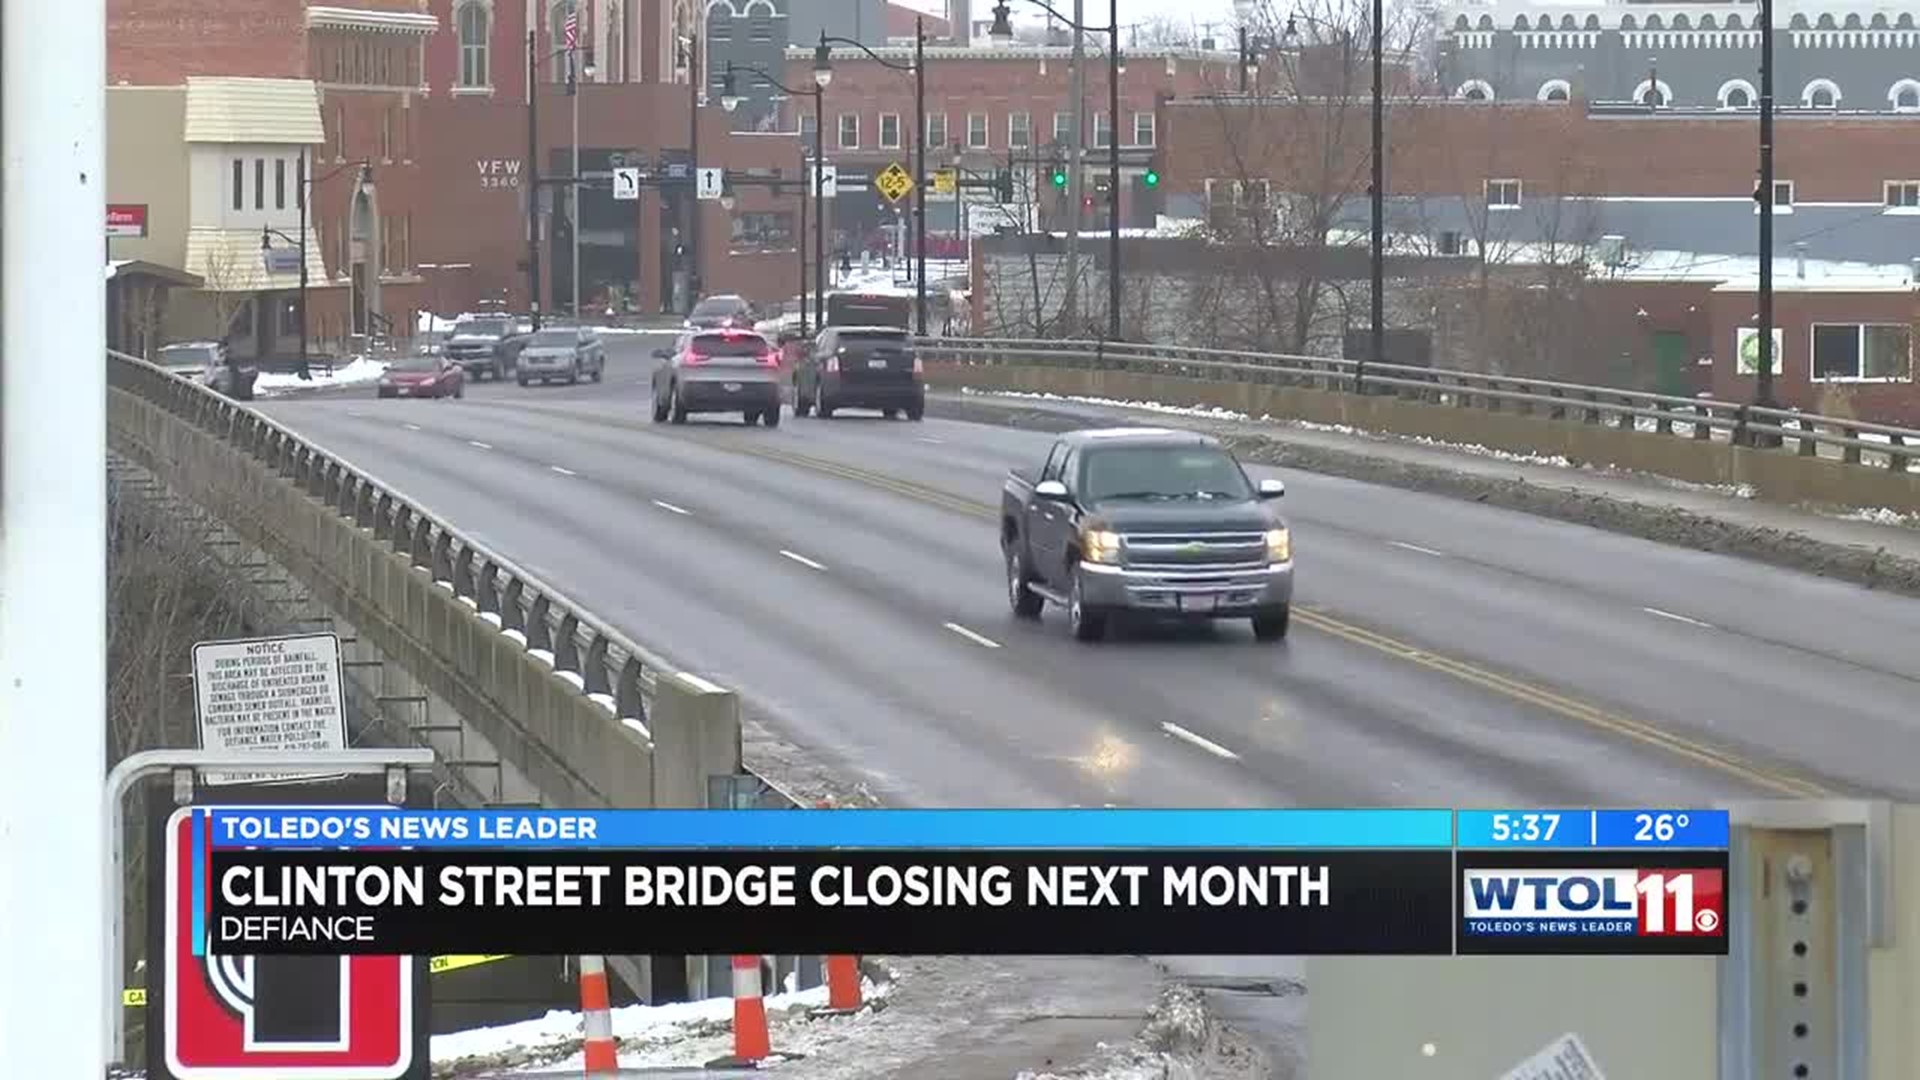 ODOT to hold public meeting Wednesday for Clinton Street bridge closure in Defiance